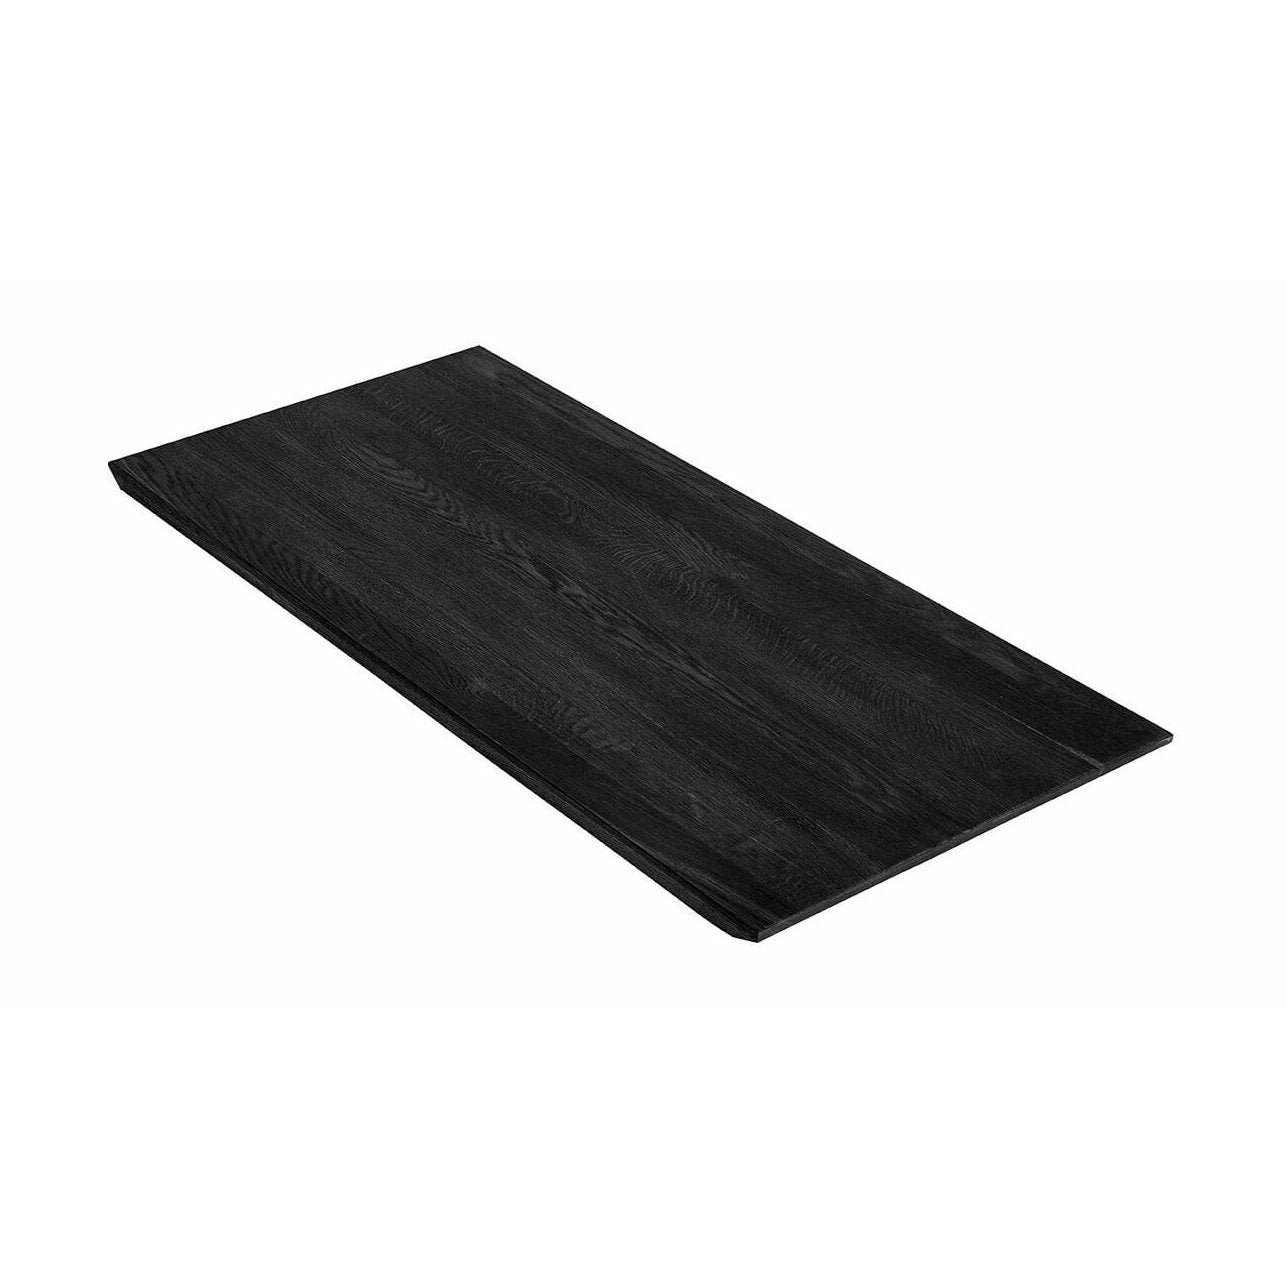 Muubs Space Additional Plate Black, 100cm